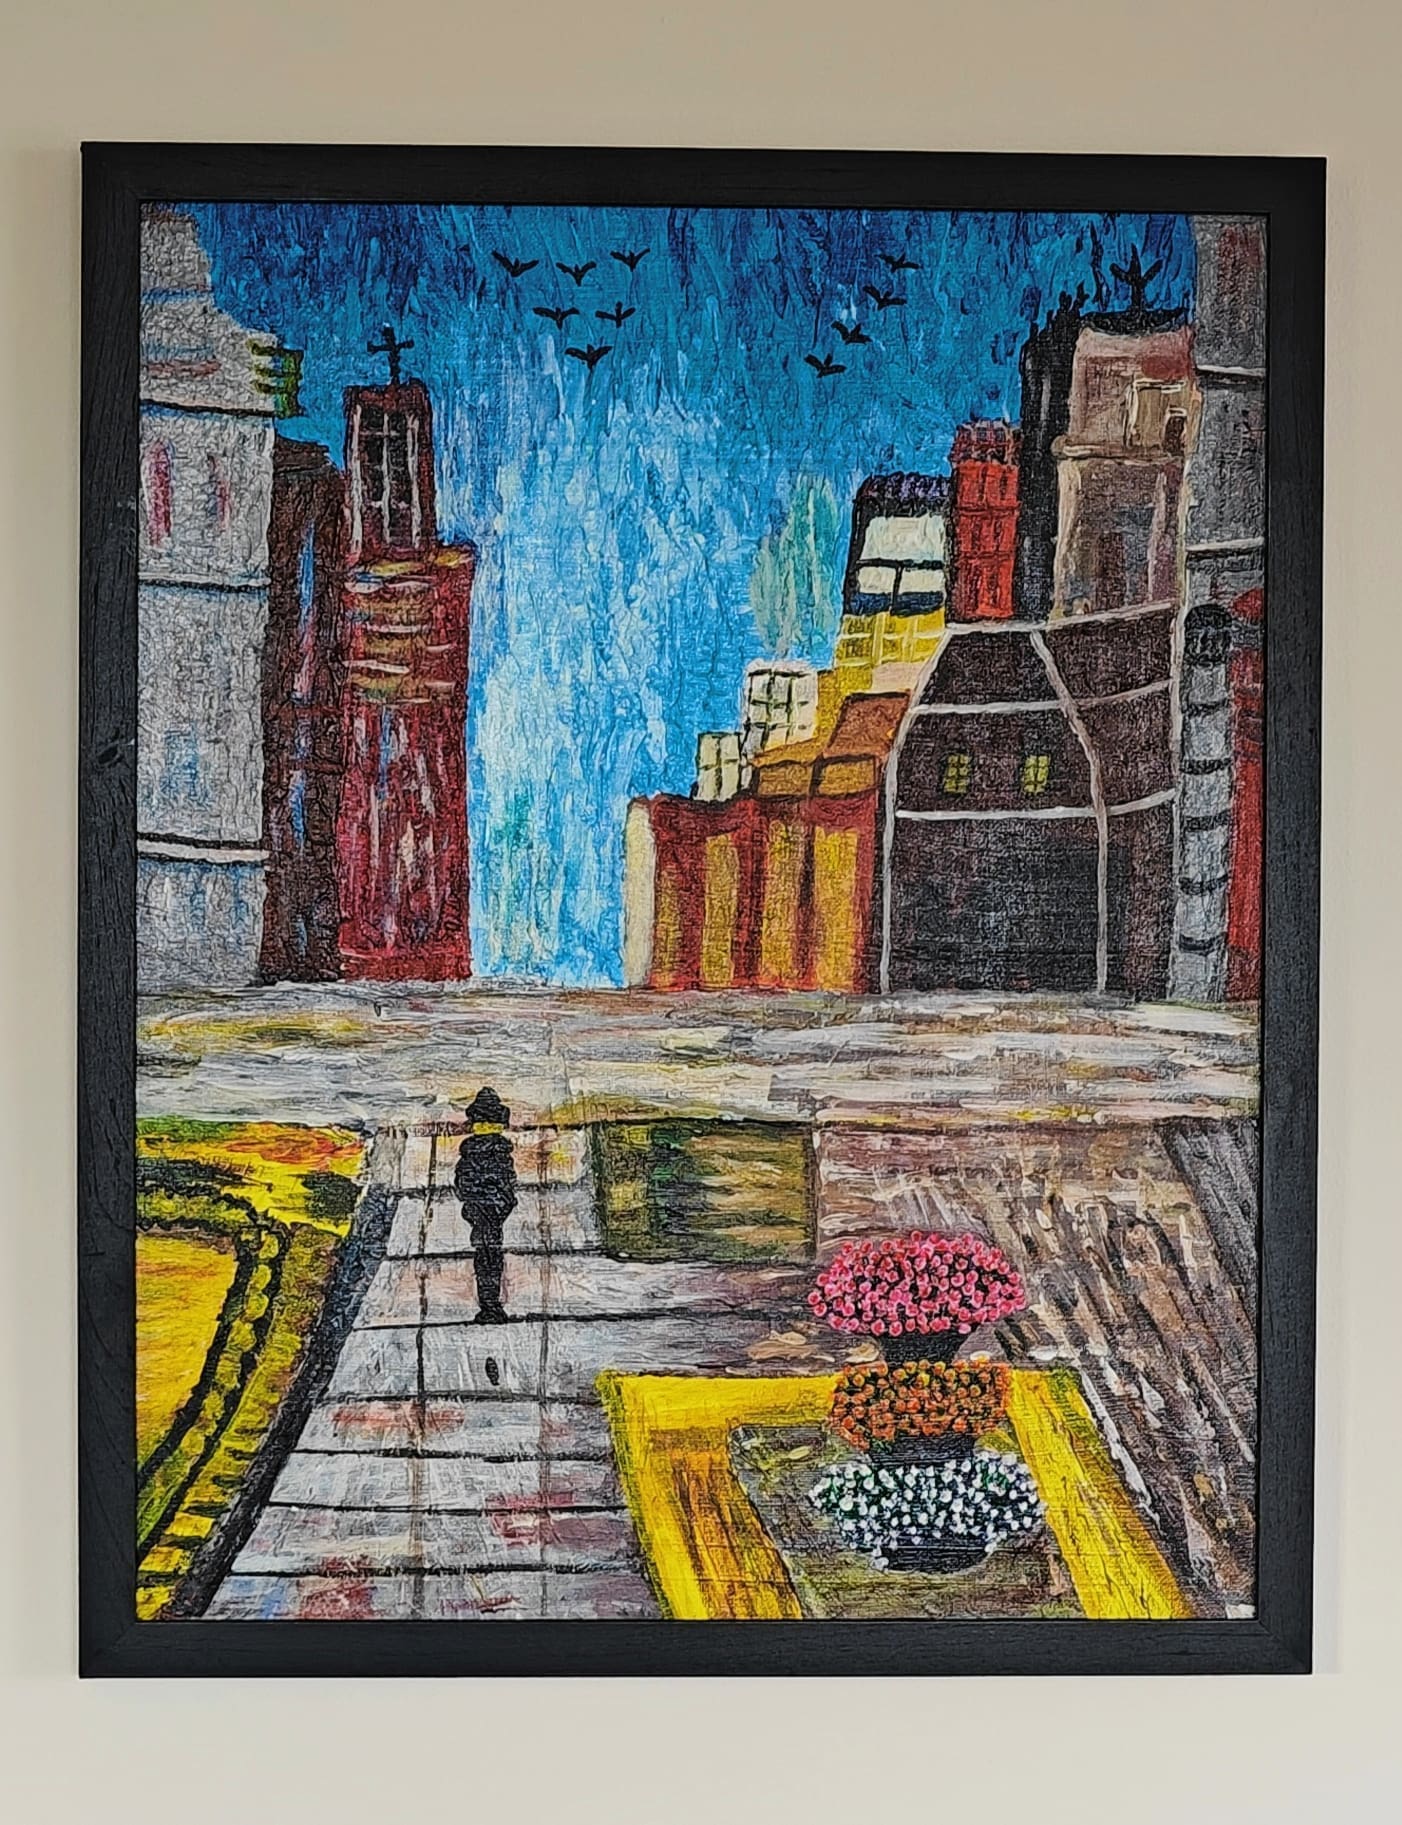 Skyscrapers – hand painted on Canvas using Acrylic Paints